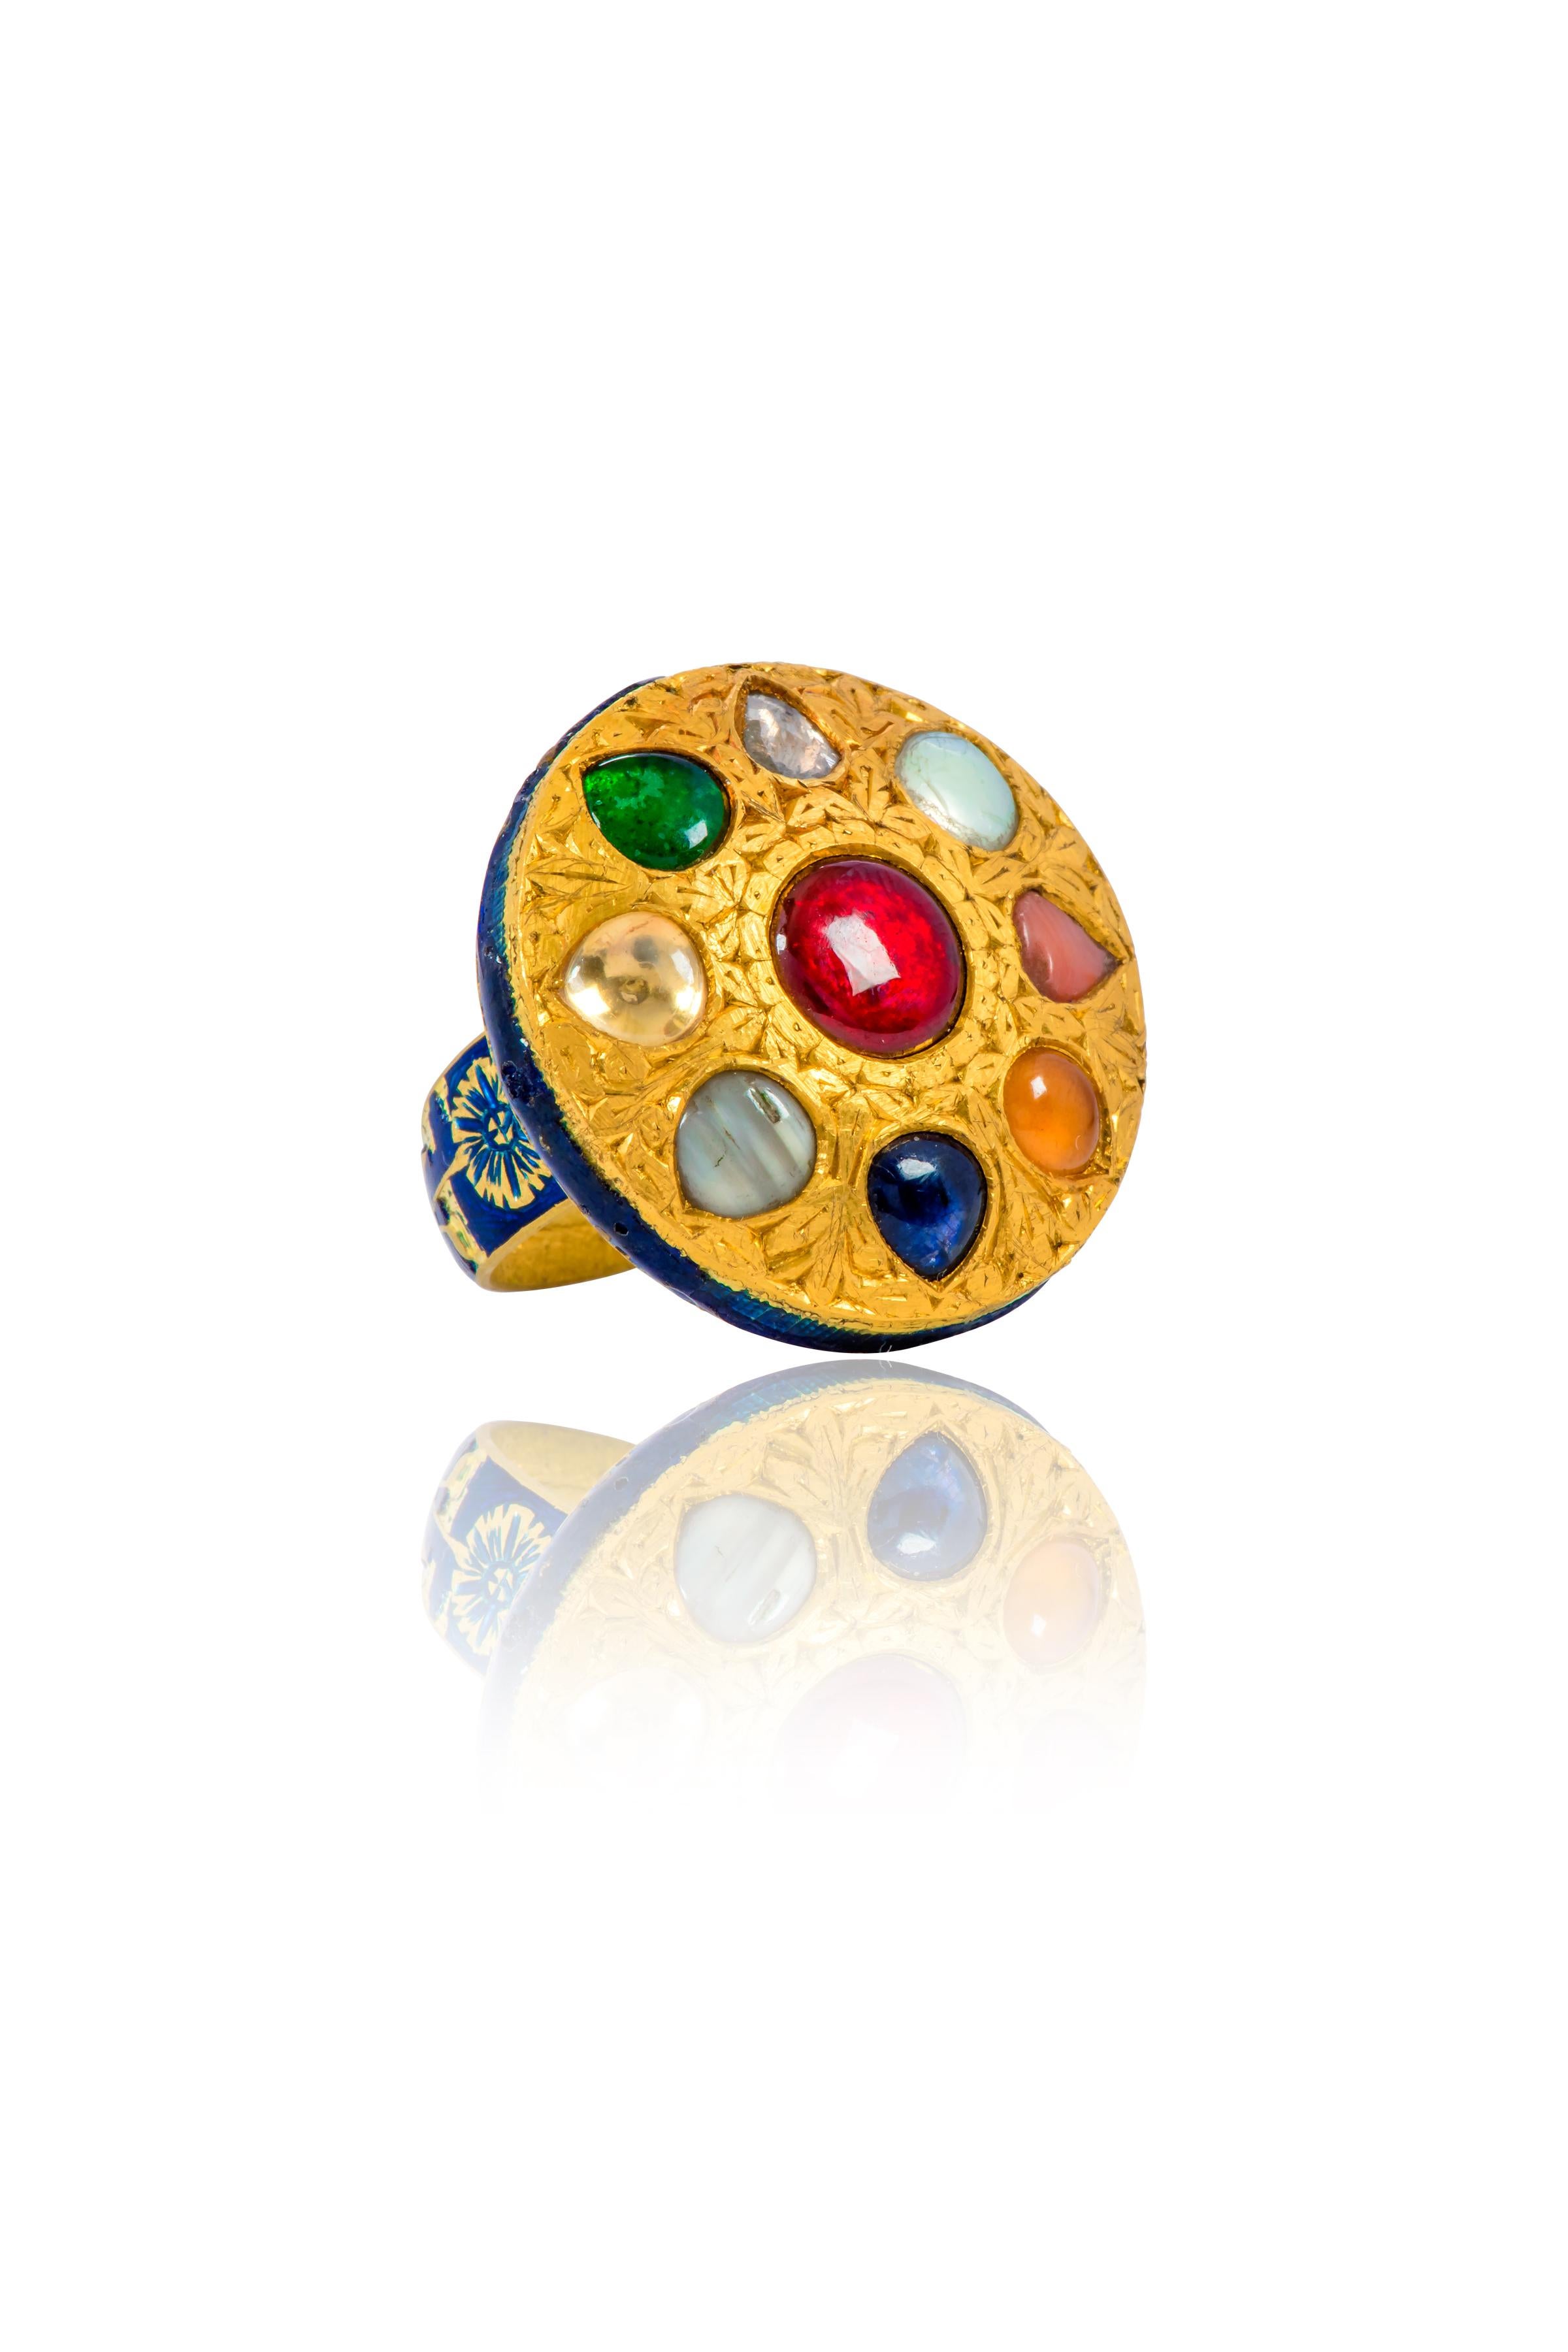 22 Karat Gold Nine Precious Gems Cocktail Ring with Blue Enamel Work

This immaculate antiquated Mughal period hand-crafted gold embroidered and blue enamel Navratan (nine) gems ring is mesmerizing. Navratnas of the nine gemstones represent the nine